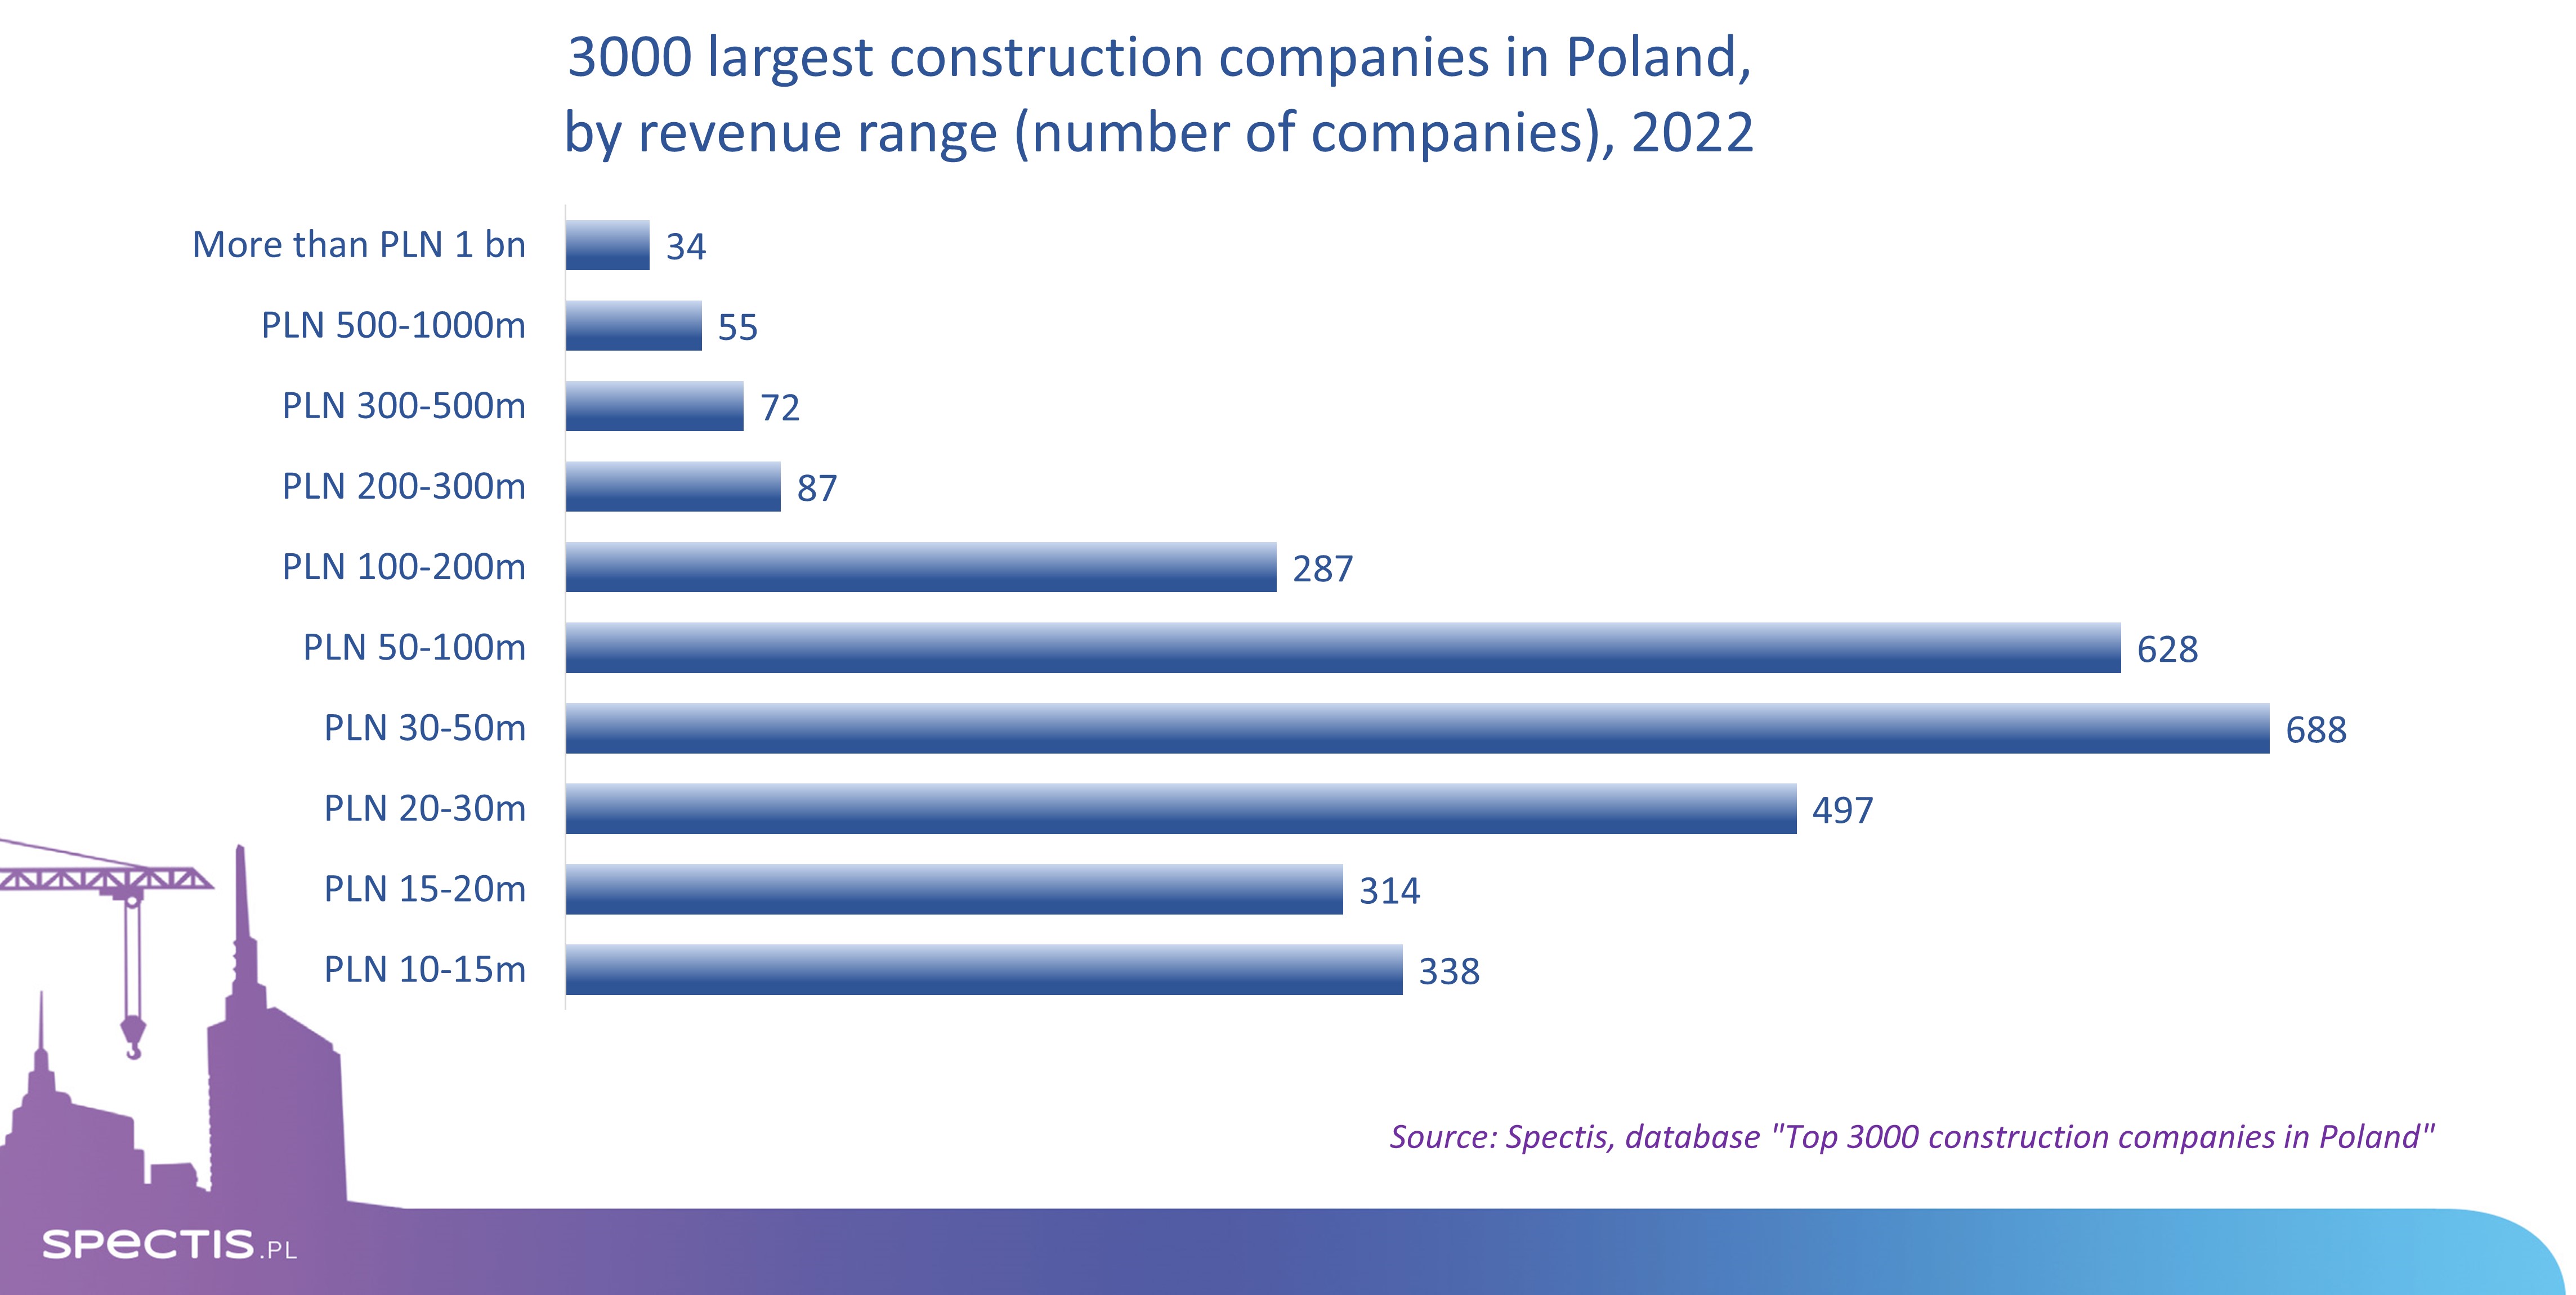 Update of the database of top 3,000 construction companies in Poland